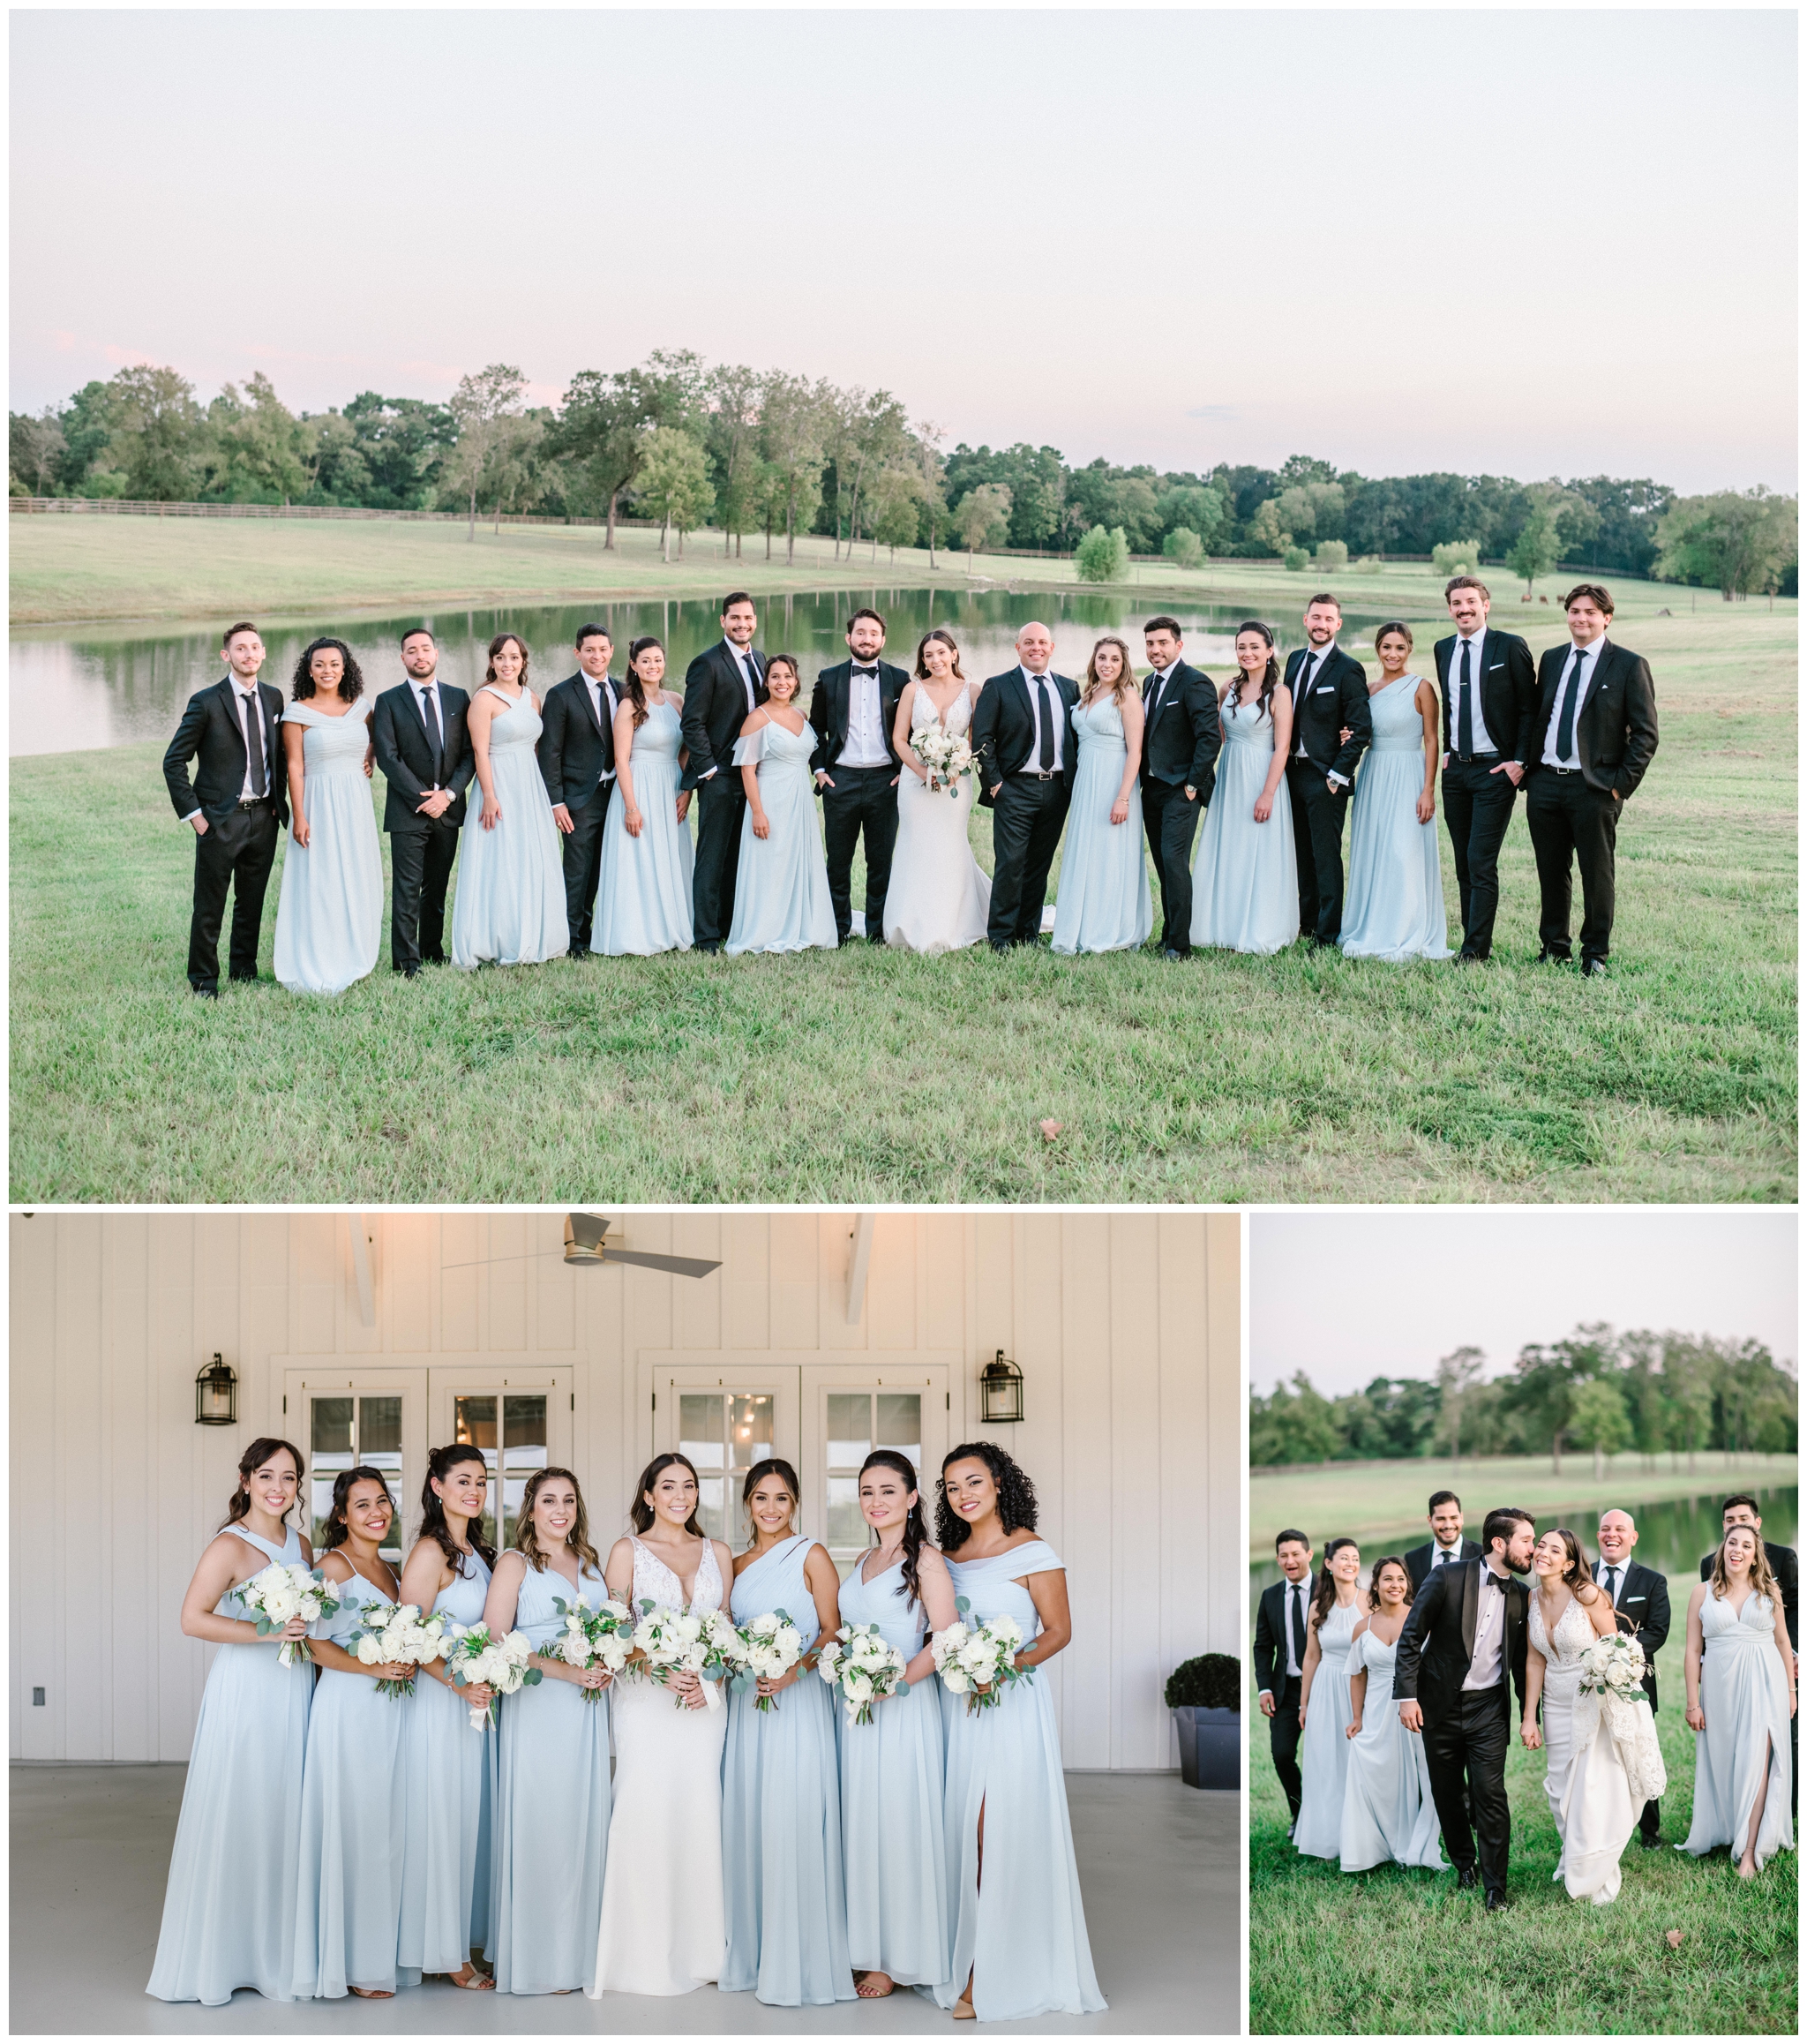 Fall wedding reception at The Farmhouse in Montgomery, Texas | Joslyn Holtfort Photography